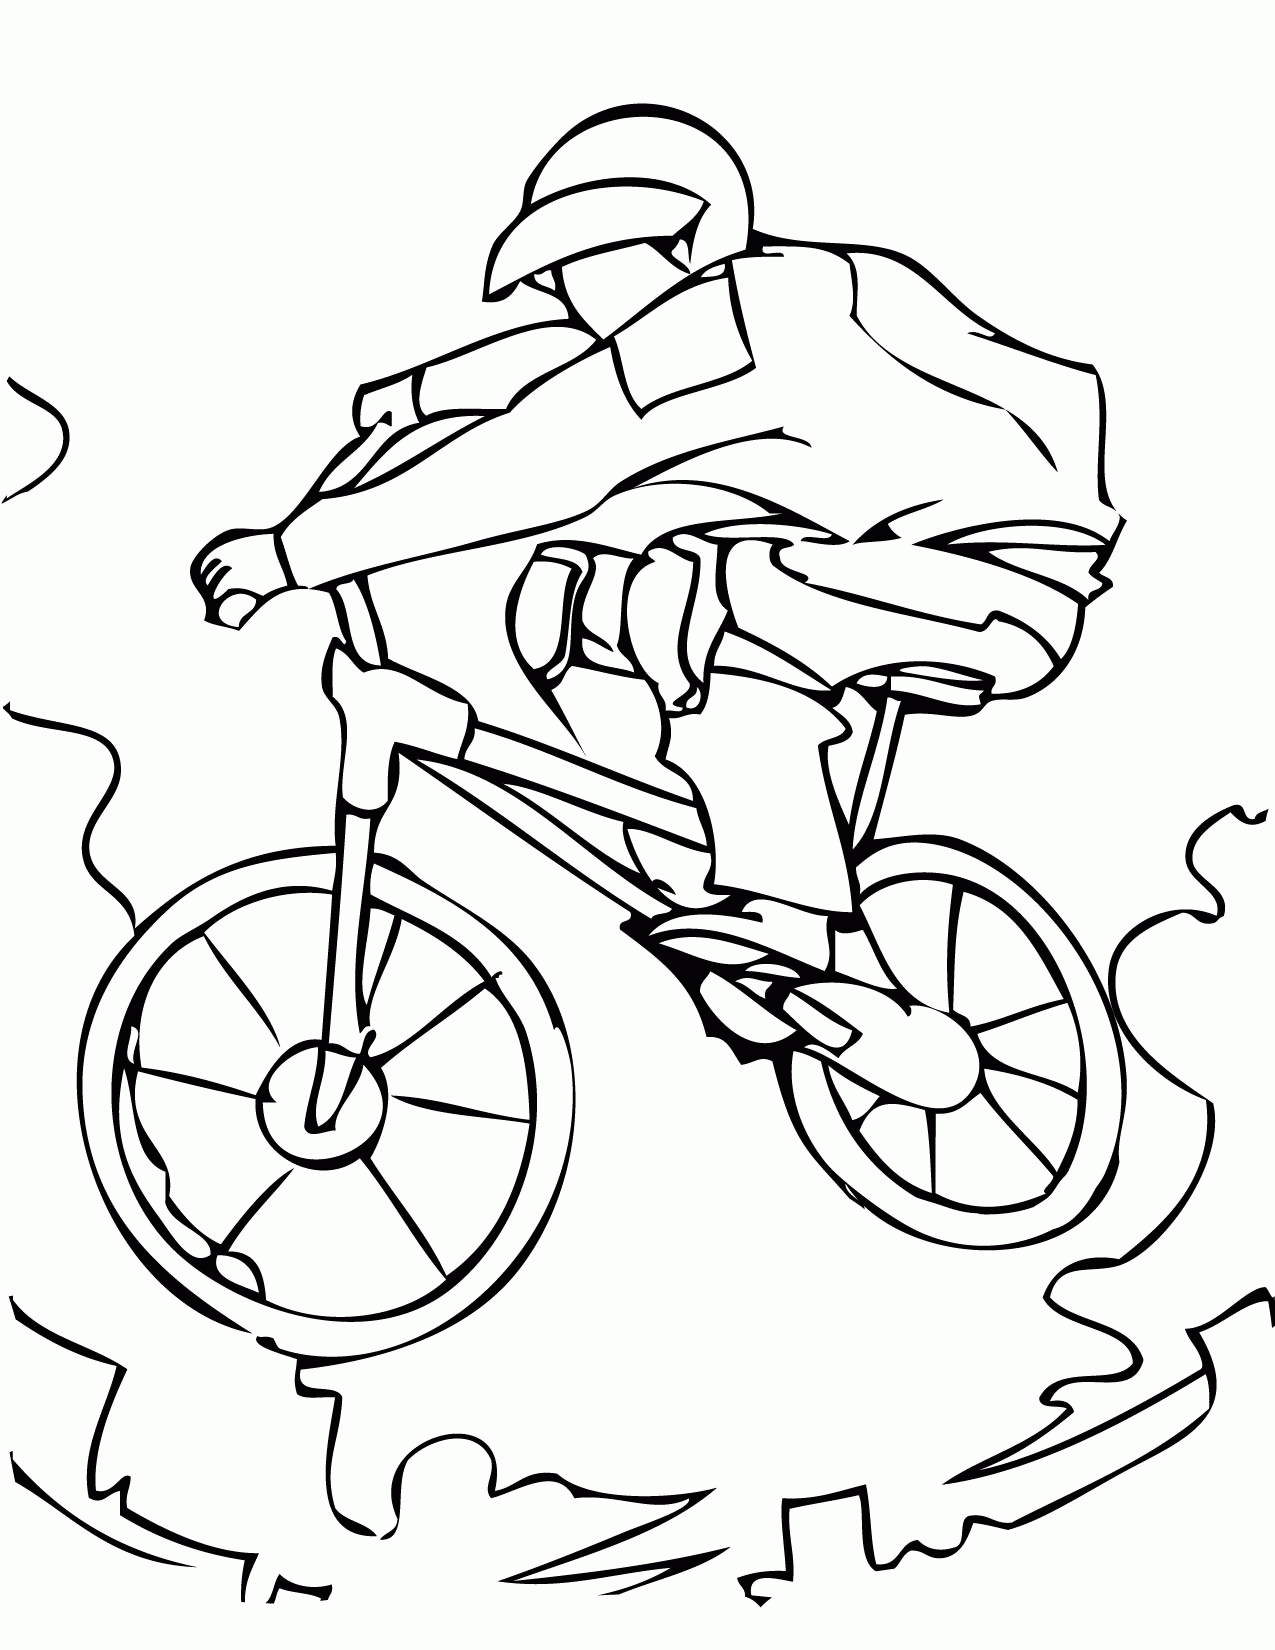 BMX Coloring Page - Handipoints